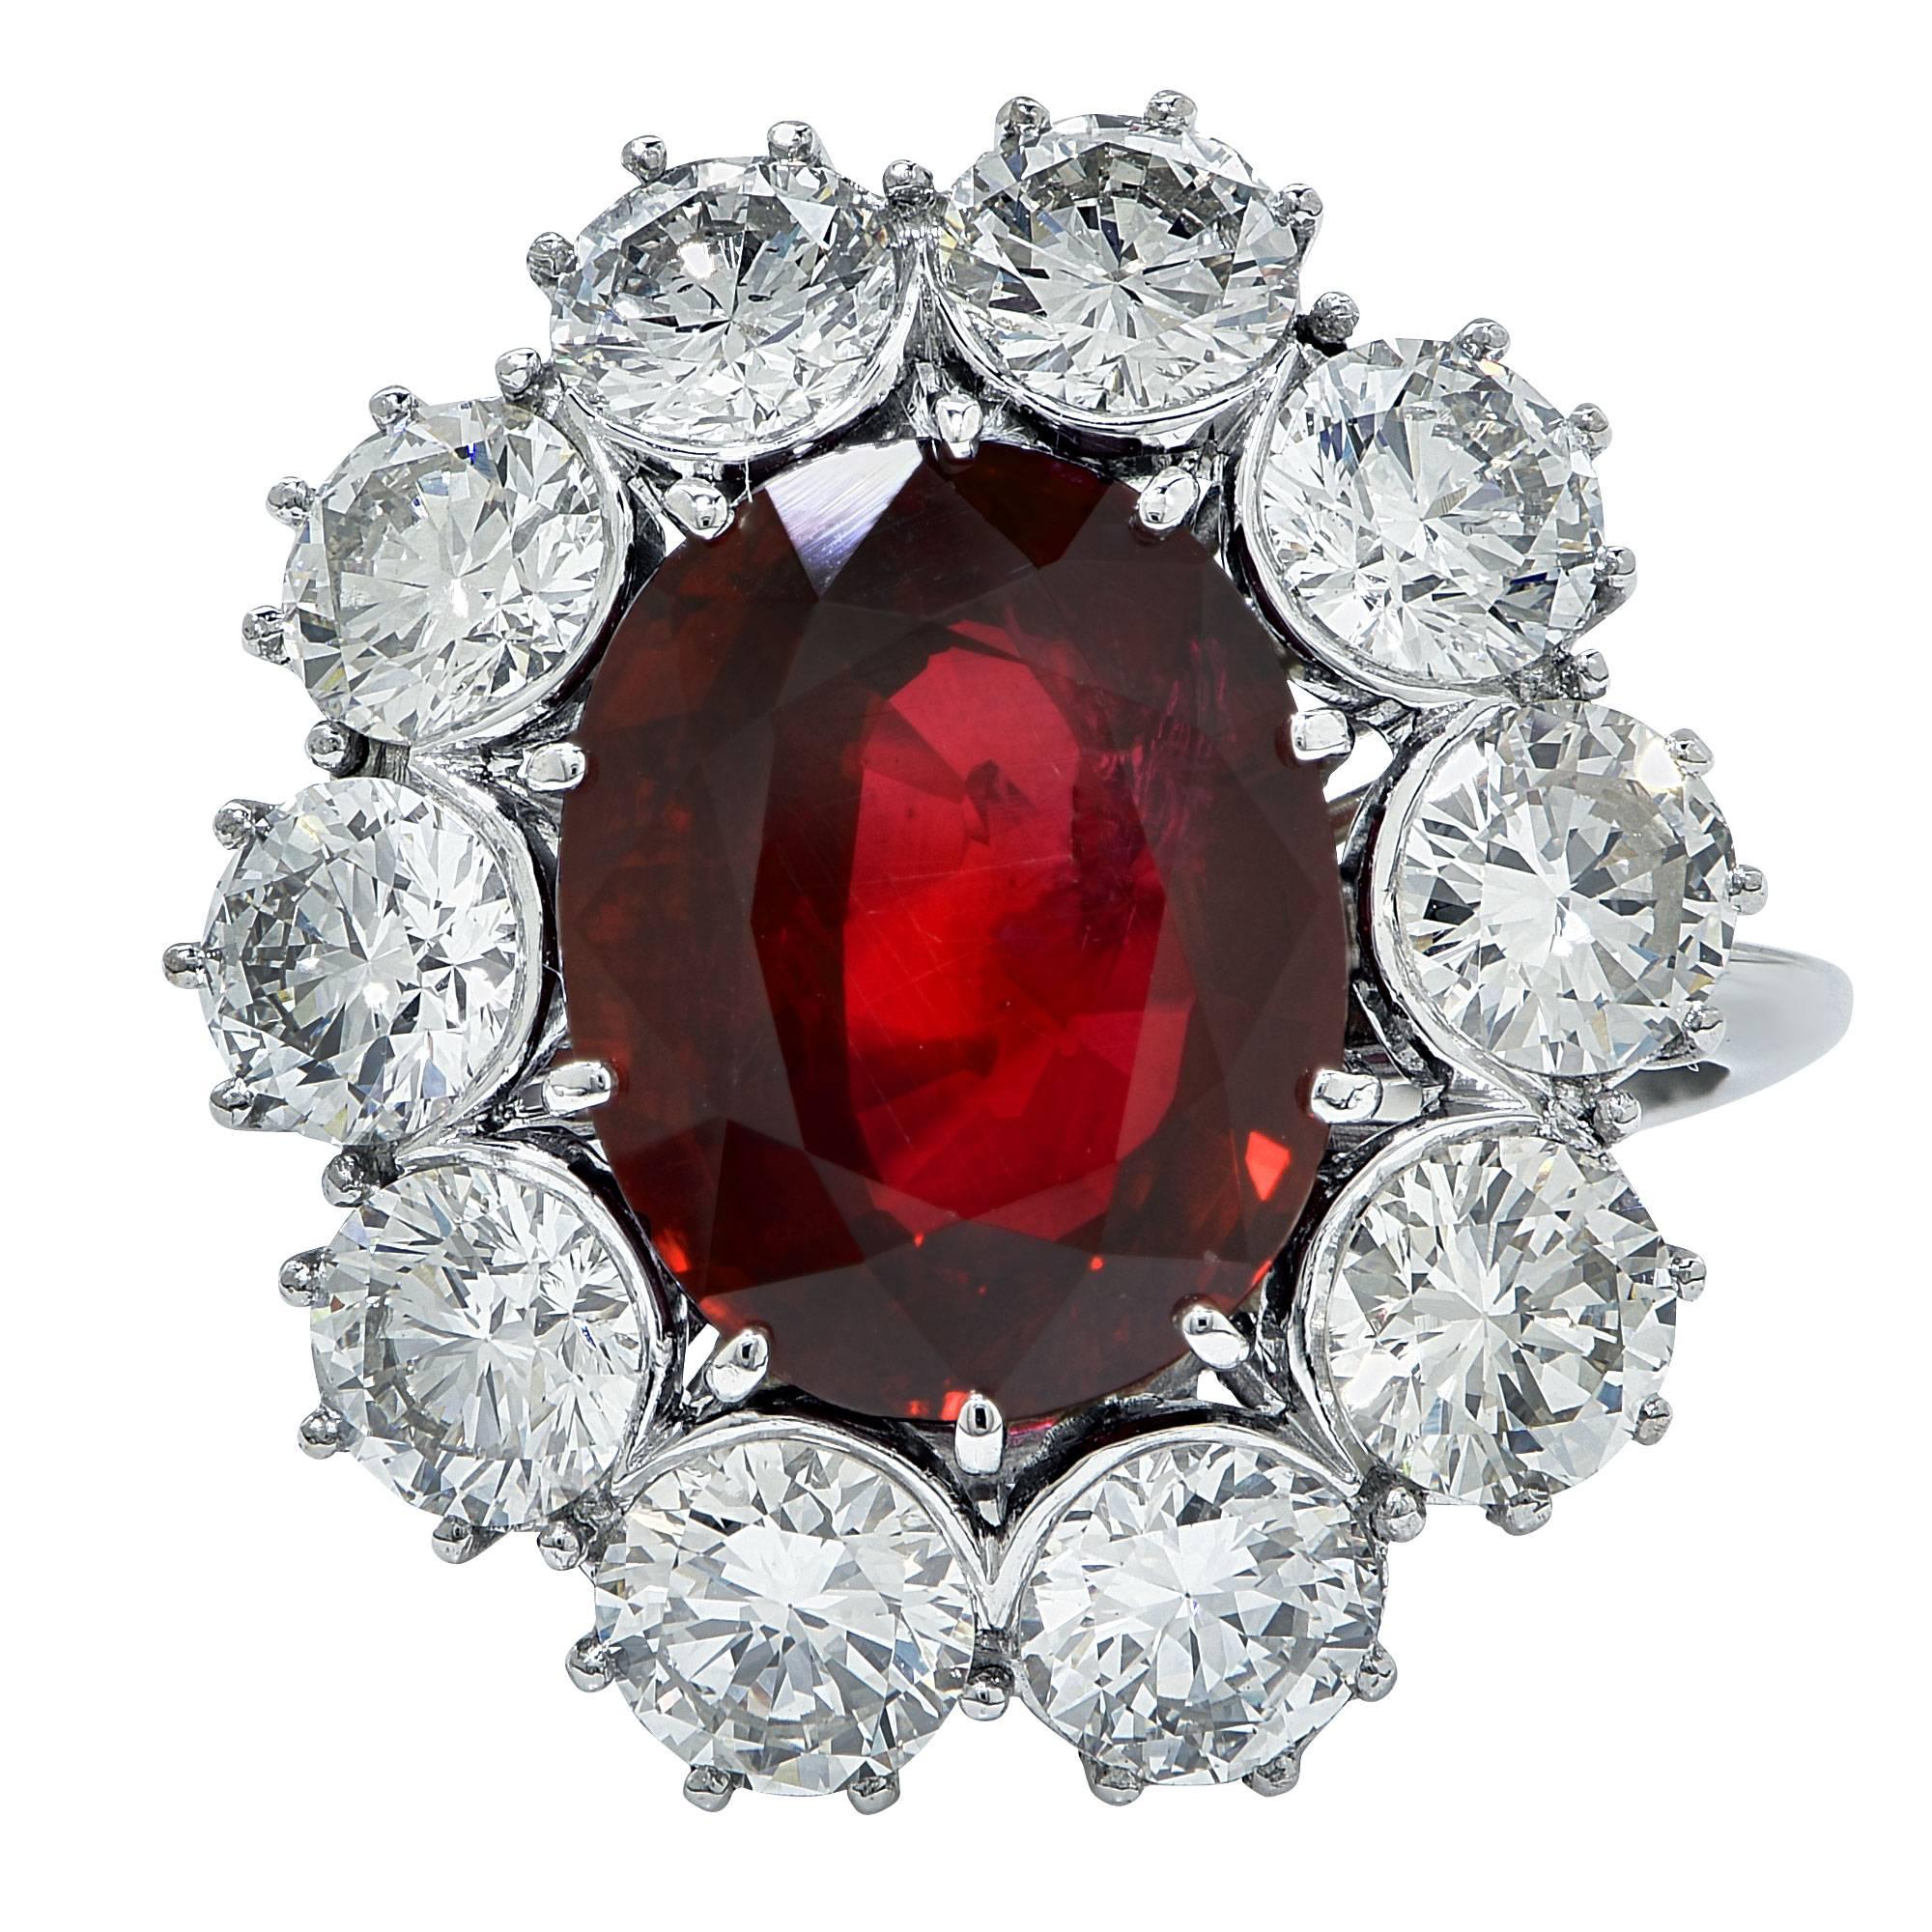 Platinum custom-made ring featuring a 5.52ct oval cut ruby GIA, accented by 11 round brilliant cut diamonds weighing 3.64cts total G color VS clarity.

Ring size: 6 (can be sized up or down)

This ruby and diamond ring is accompanied by a retail